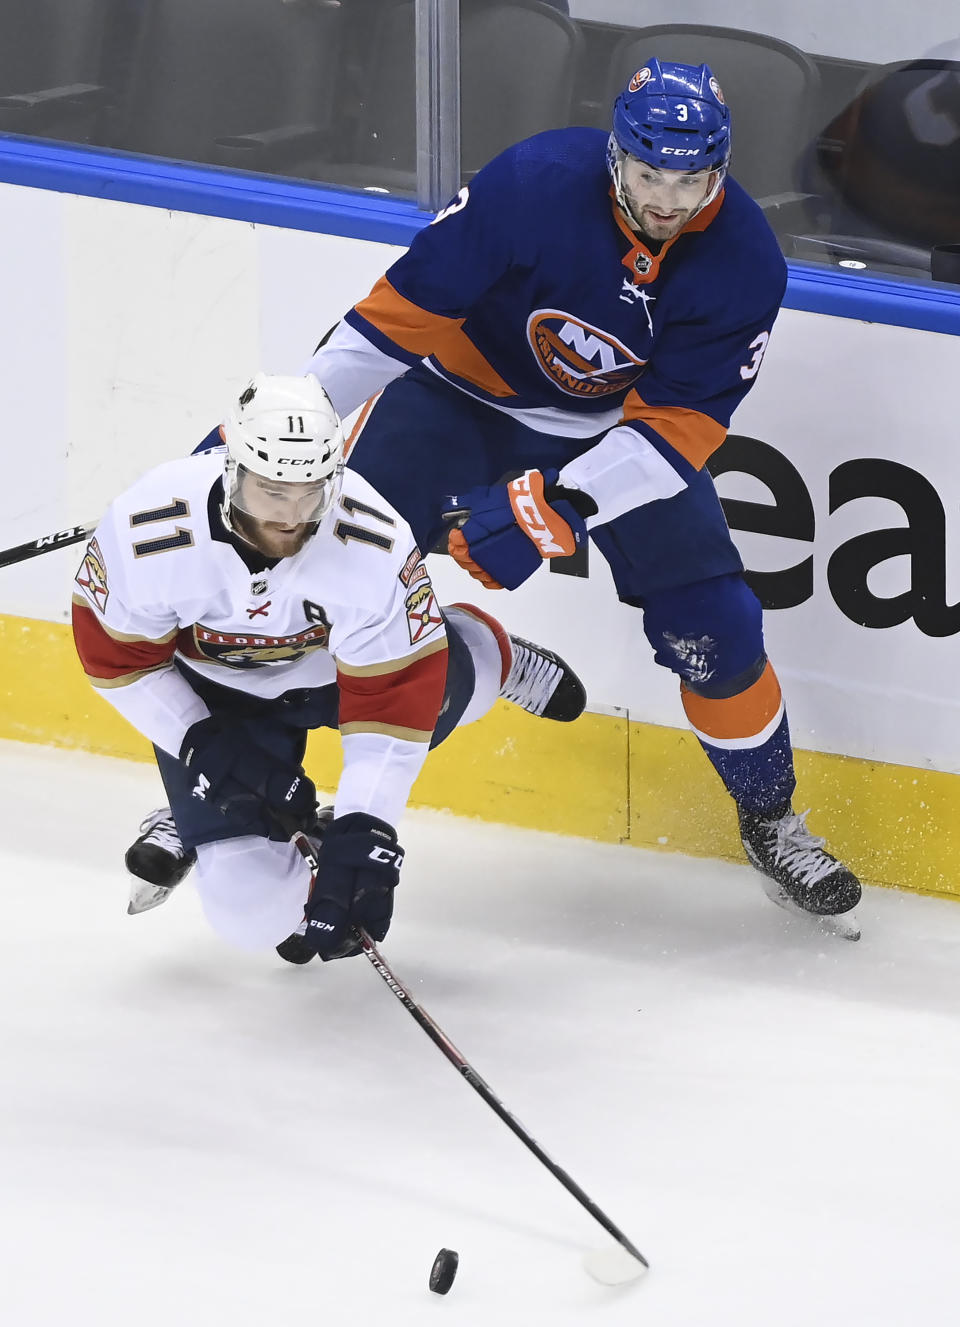 New York Islanders defenseman Adam Pelech (3) trips up Florida Panthers left wing Jonathan Huberdeau (11) during the second period of an NHL Stanley Cup playoff hockey game in Toronto, Tuesday, Aug. 4, 2020. (Nathan Denette/The Canadian Press via AP)